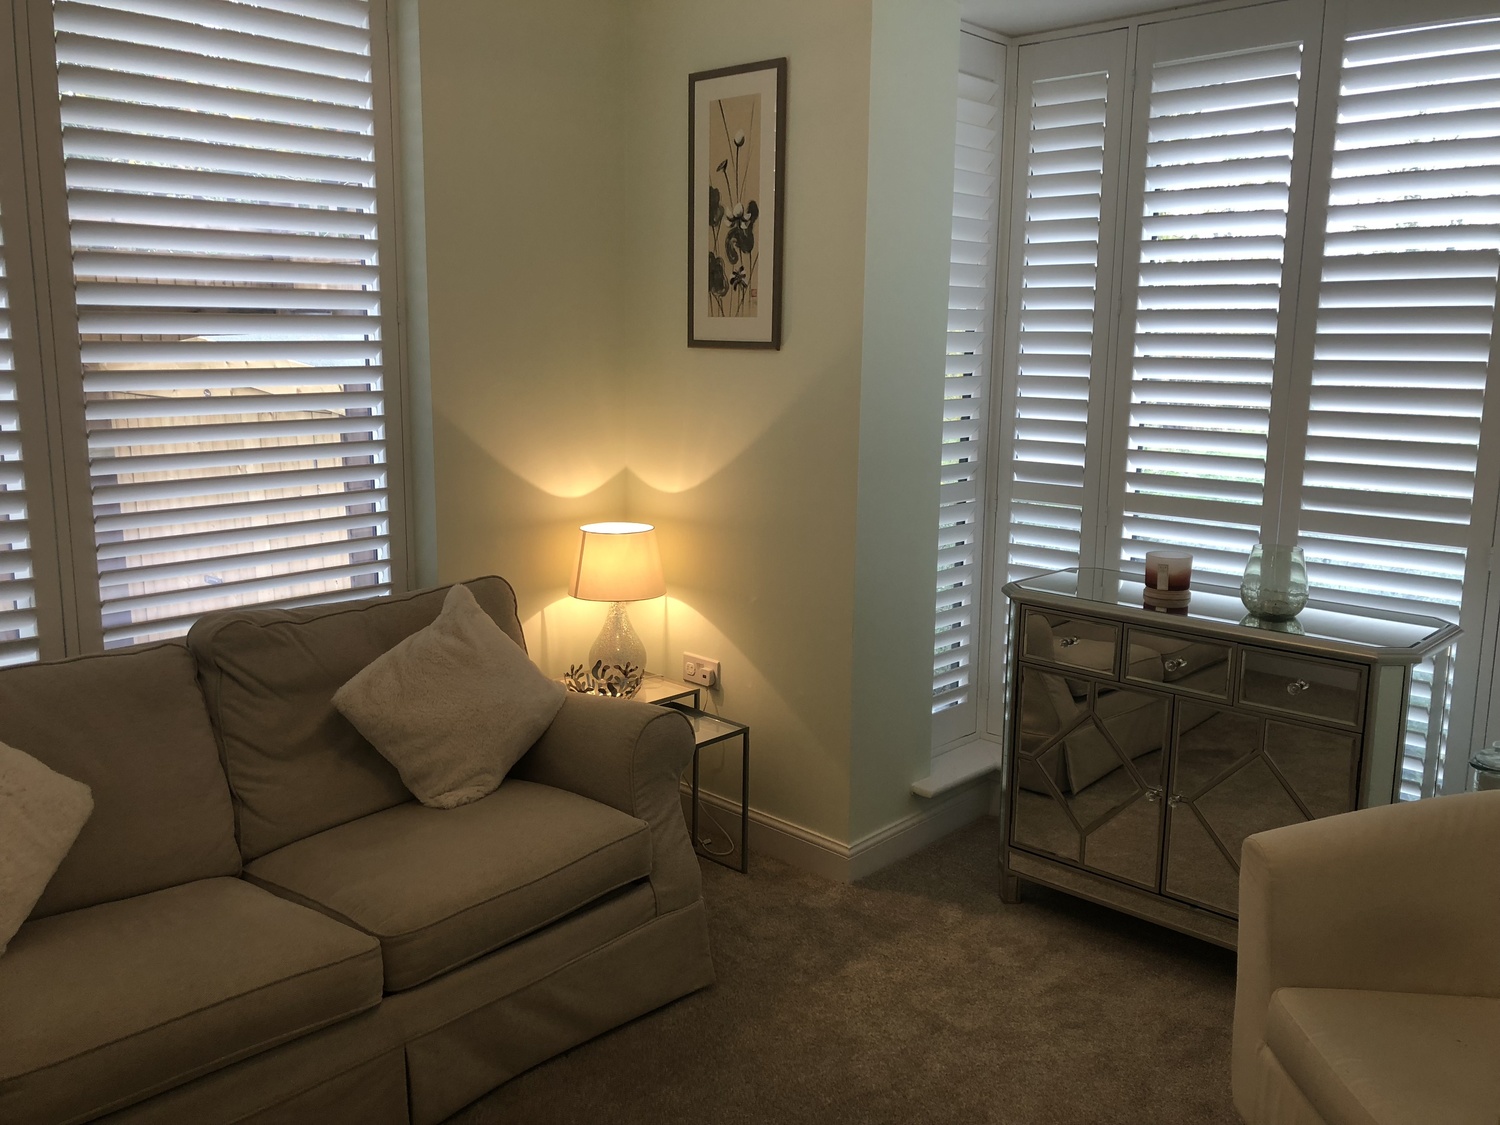 Gallery Photo of Therapy room in Coulsdon